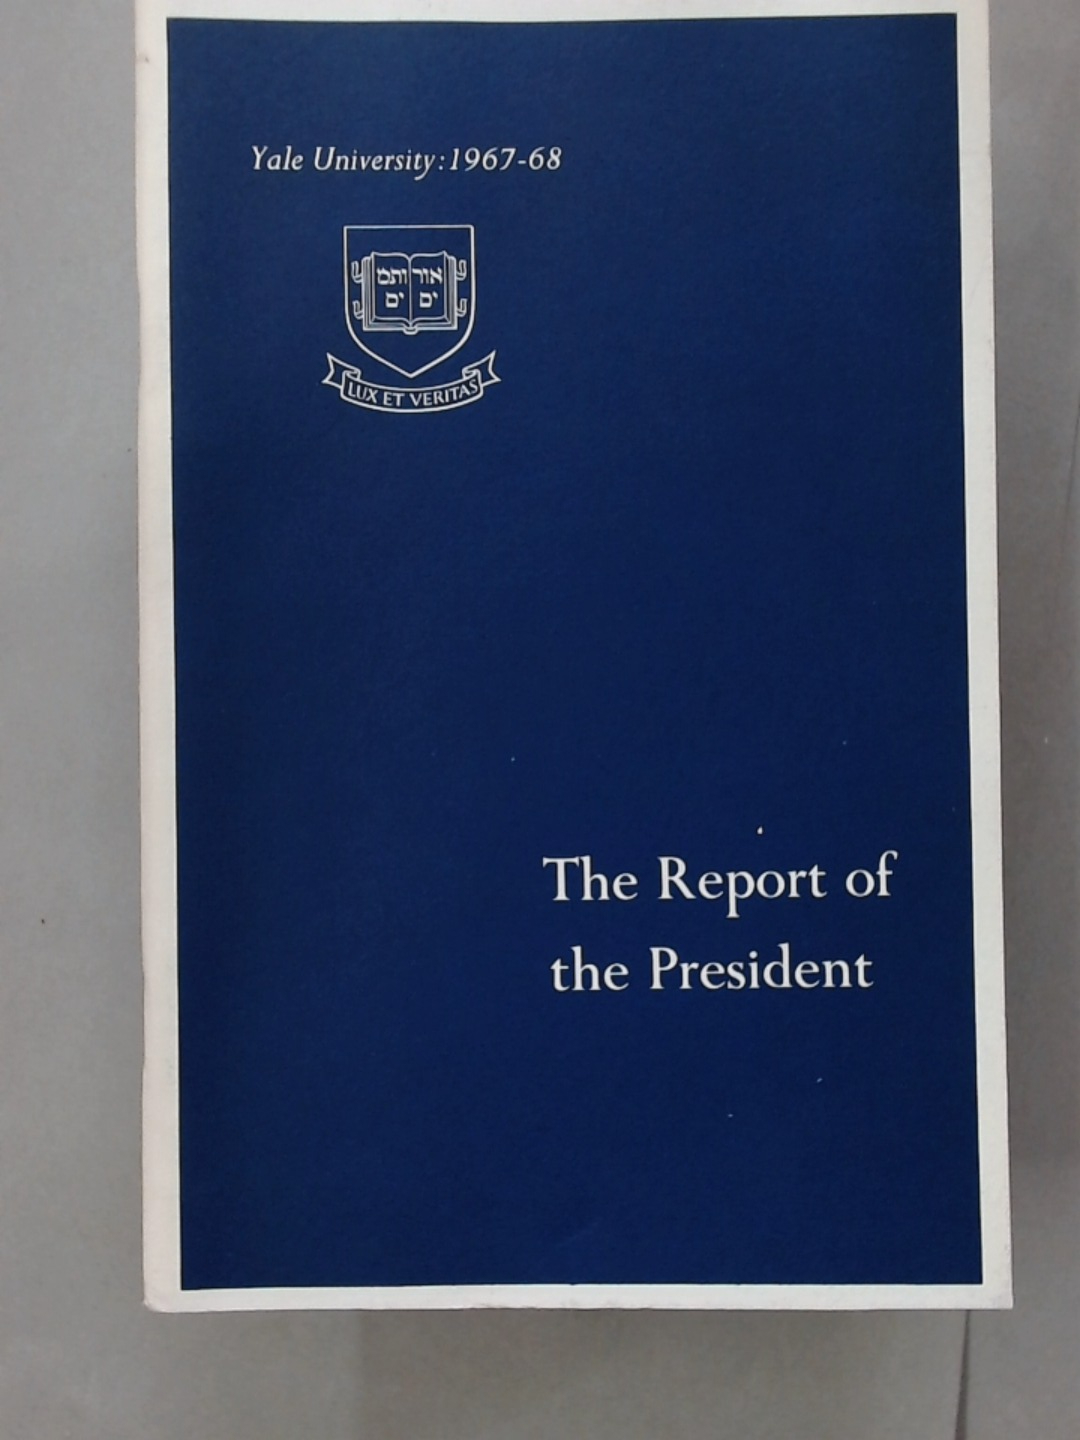 Report of the President, 1967 - 1968.